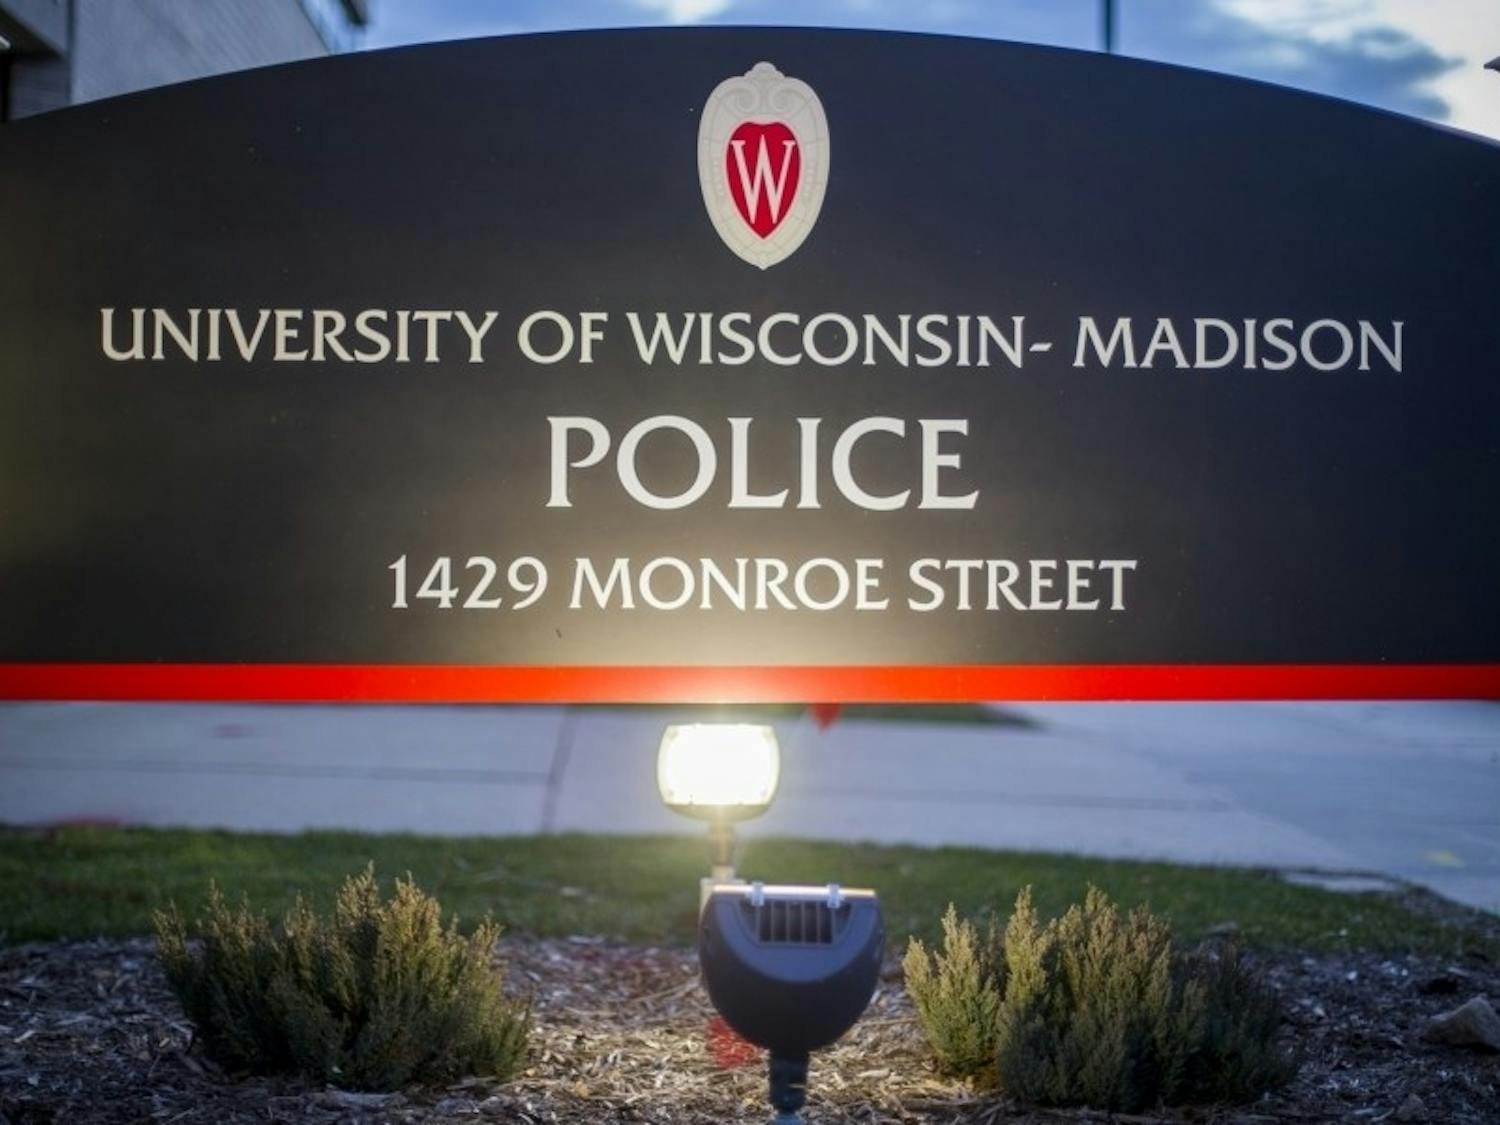 UW-Madison Police Department arrested Chanell M. Cousins, a suspect in a string of burglaries that have occurred on campus.